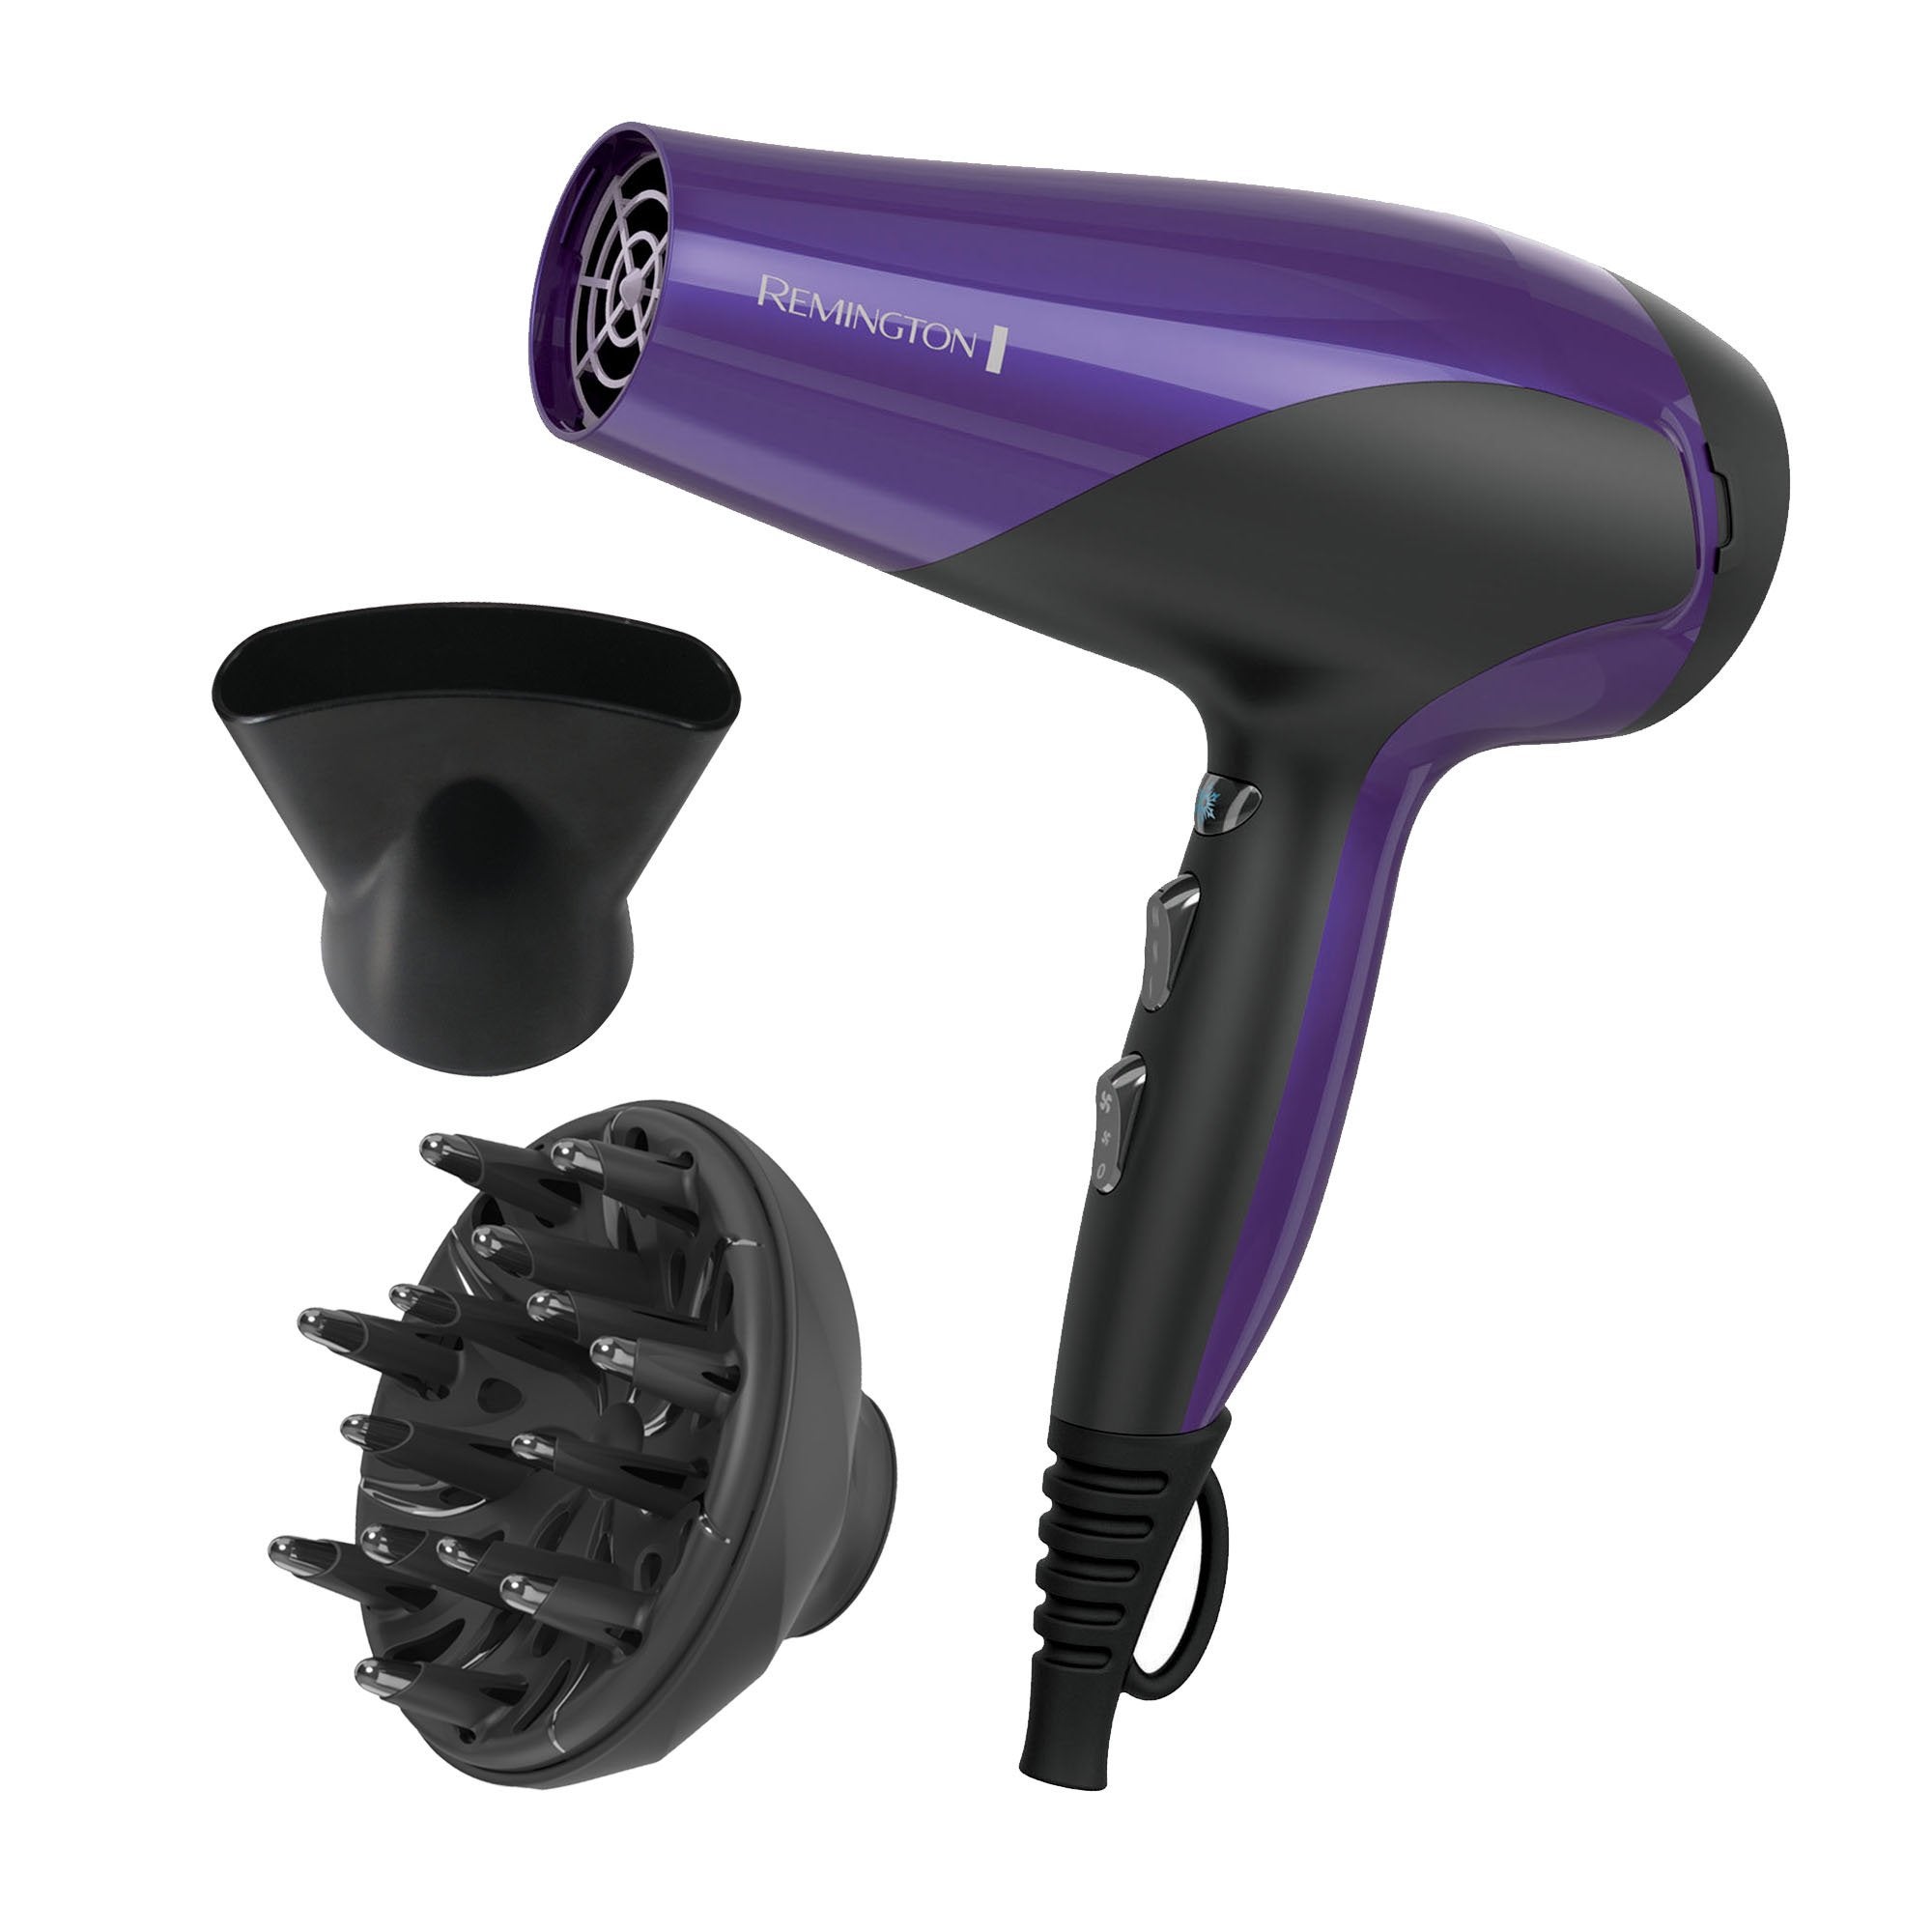 The Best Affordable Hair Dryers For Home Styling 2021